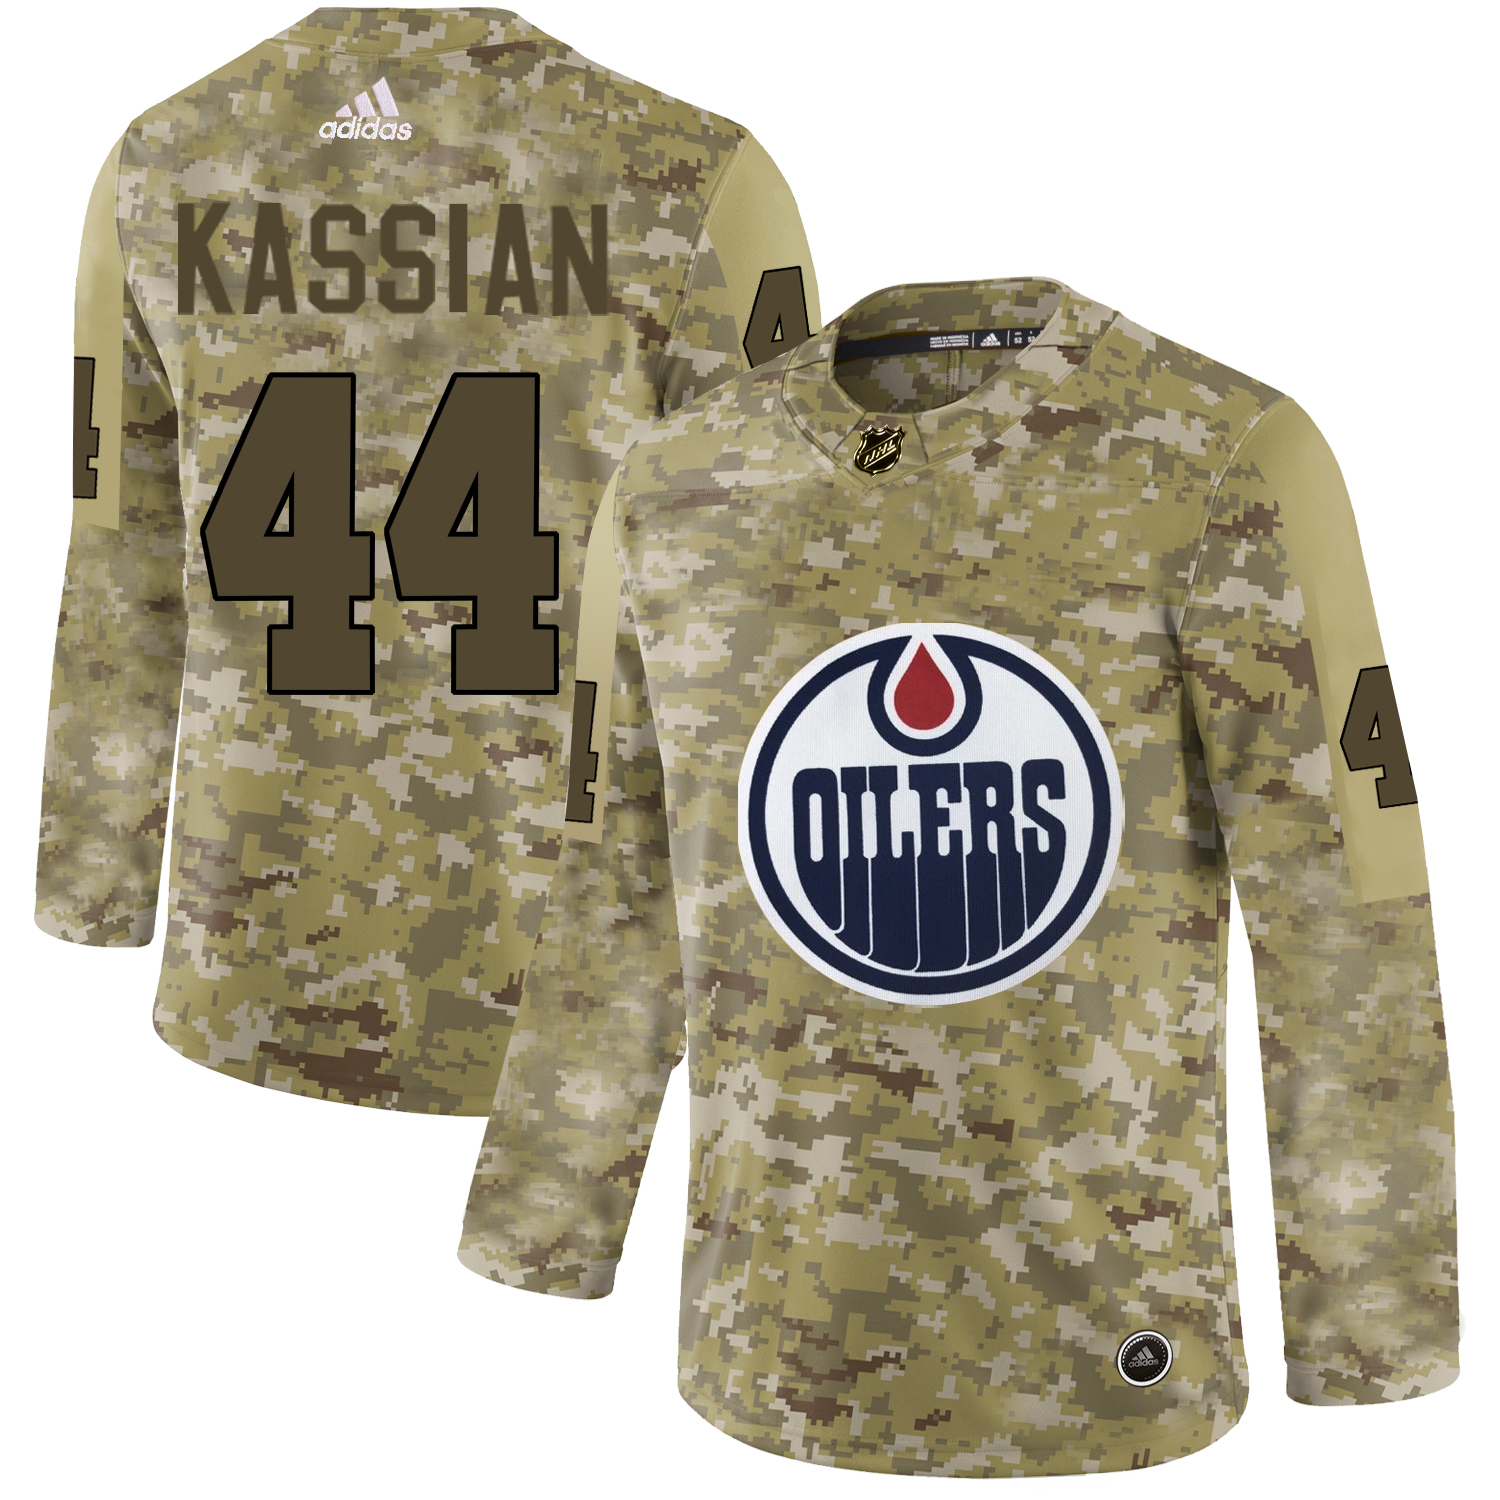 Adidas Oilers #44 Zack Kassian Camo Authentic Stitched NHL Jersey